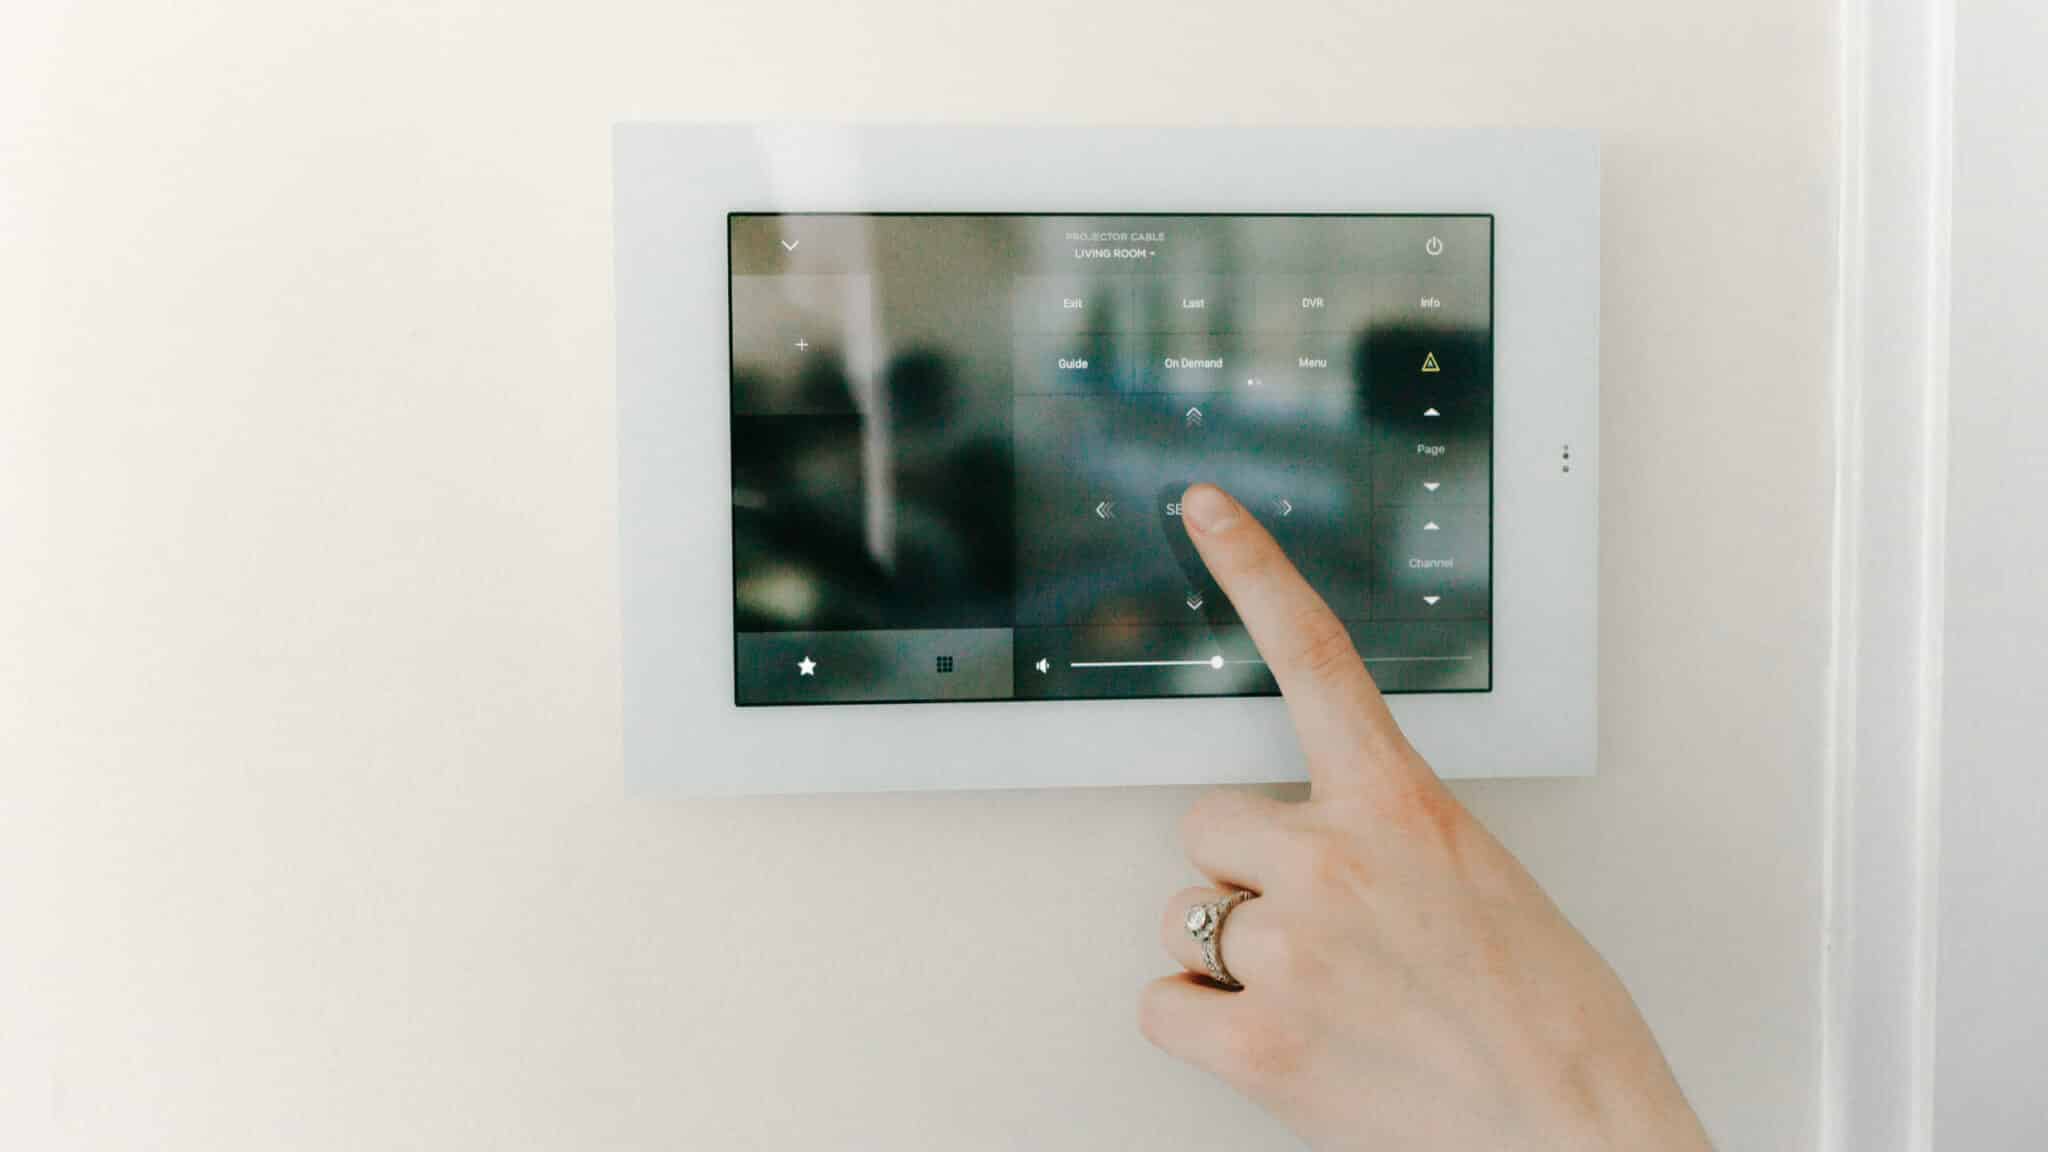 Fingering pressing security system touch pad